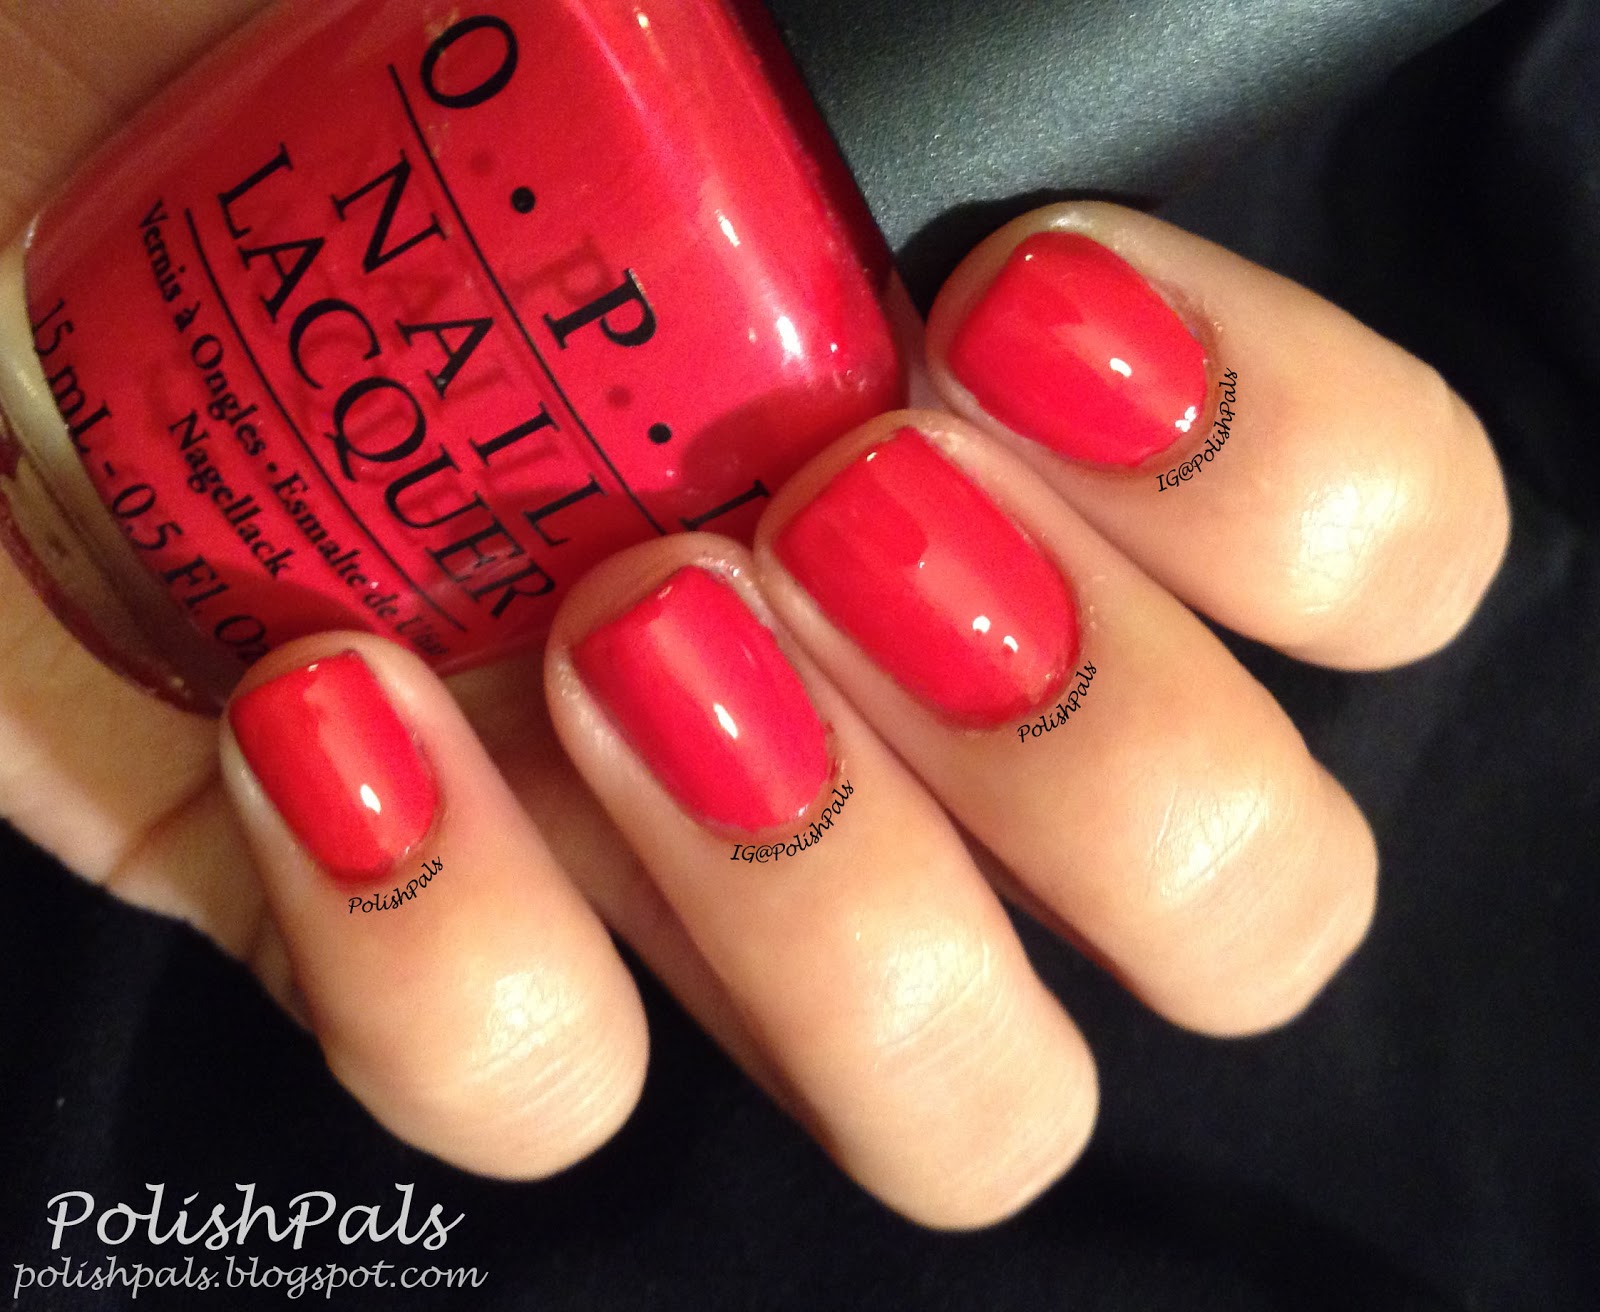 Bliss Nail Polish in "Strawberry Fields" - wide 1